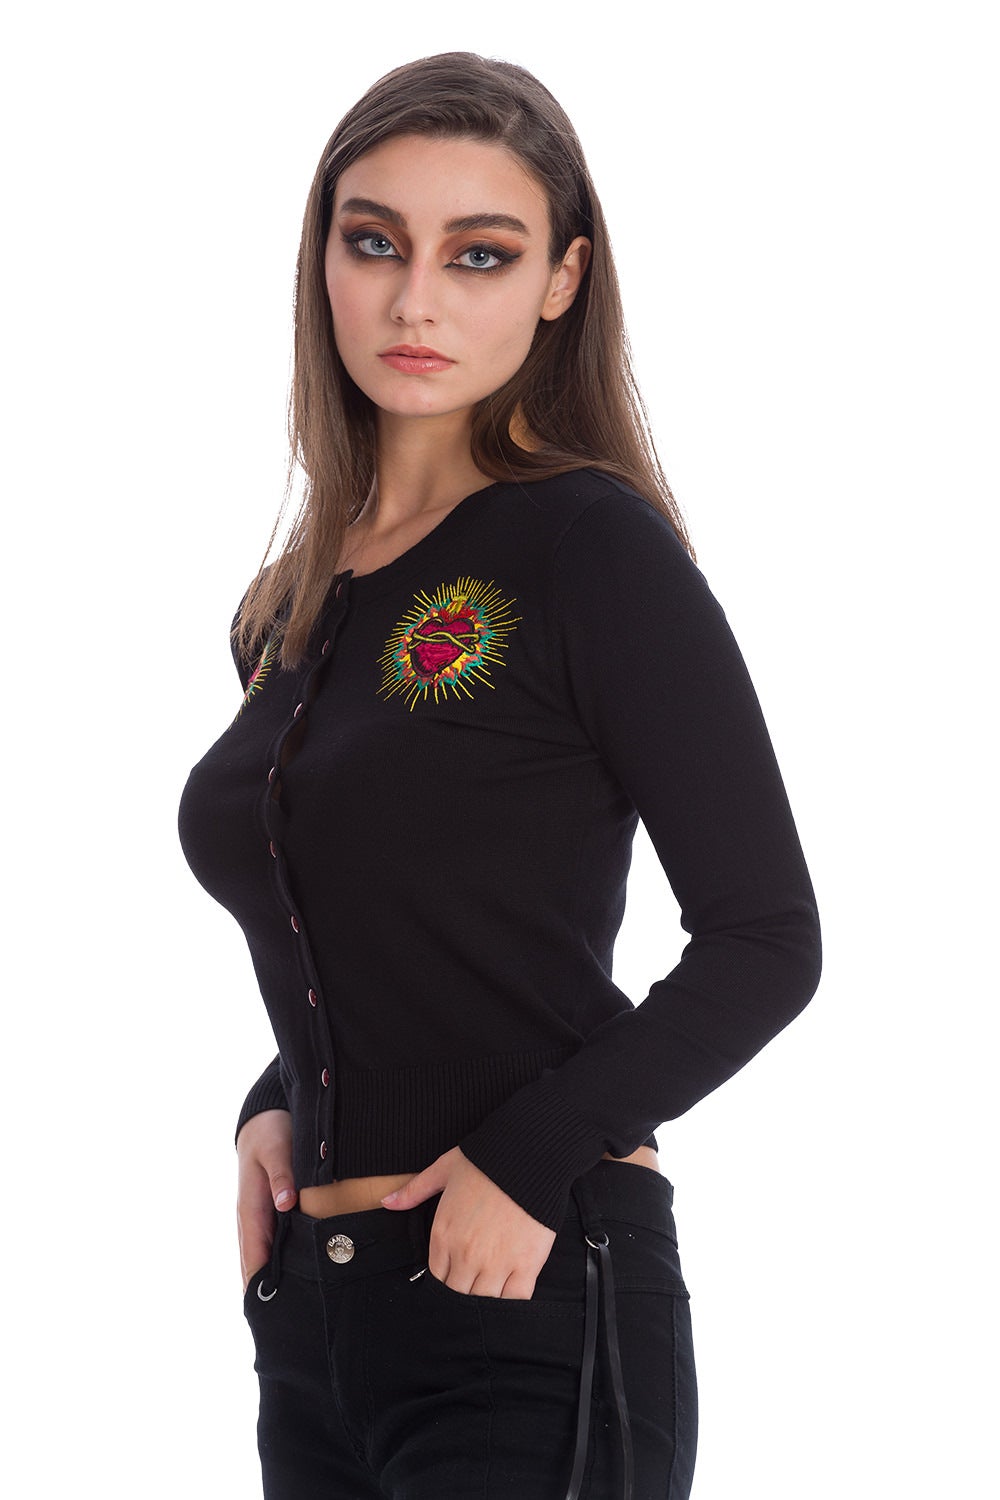 Model wearing black button up cardigan with embroidered red heart on either chest and red buttons.